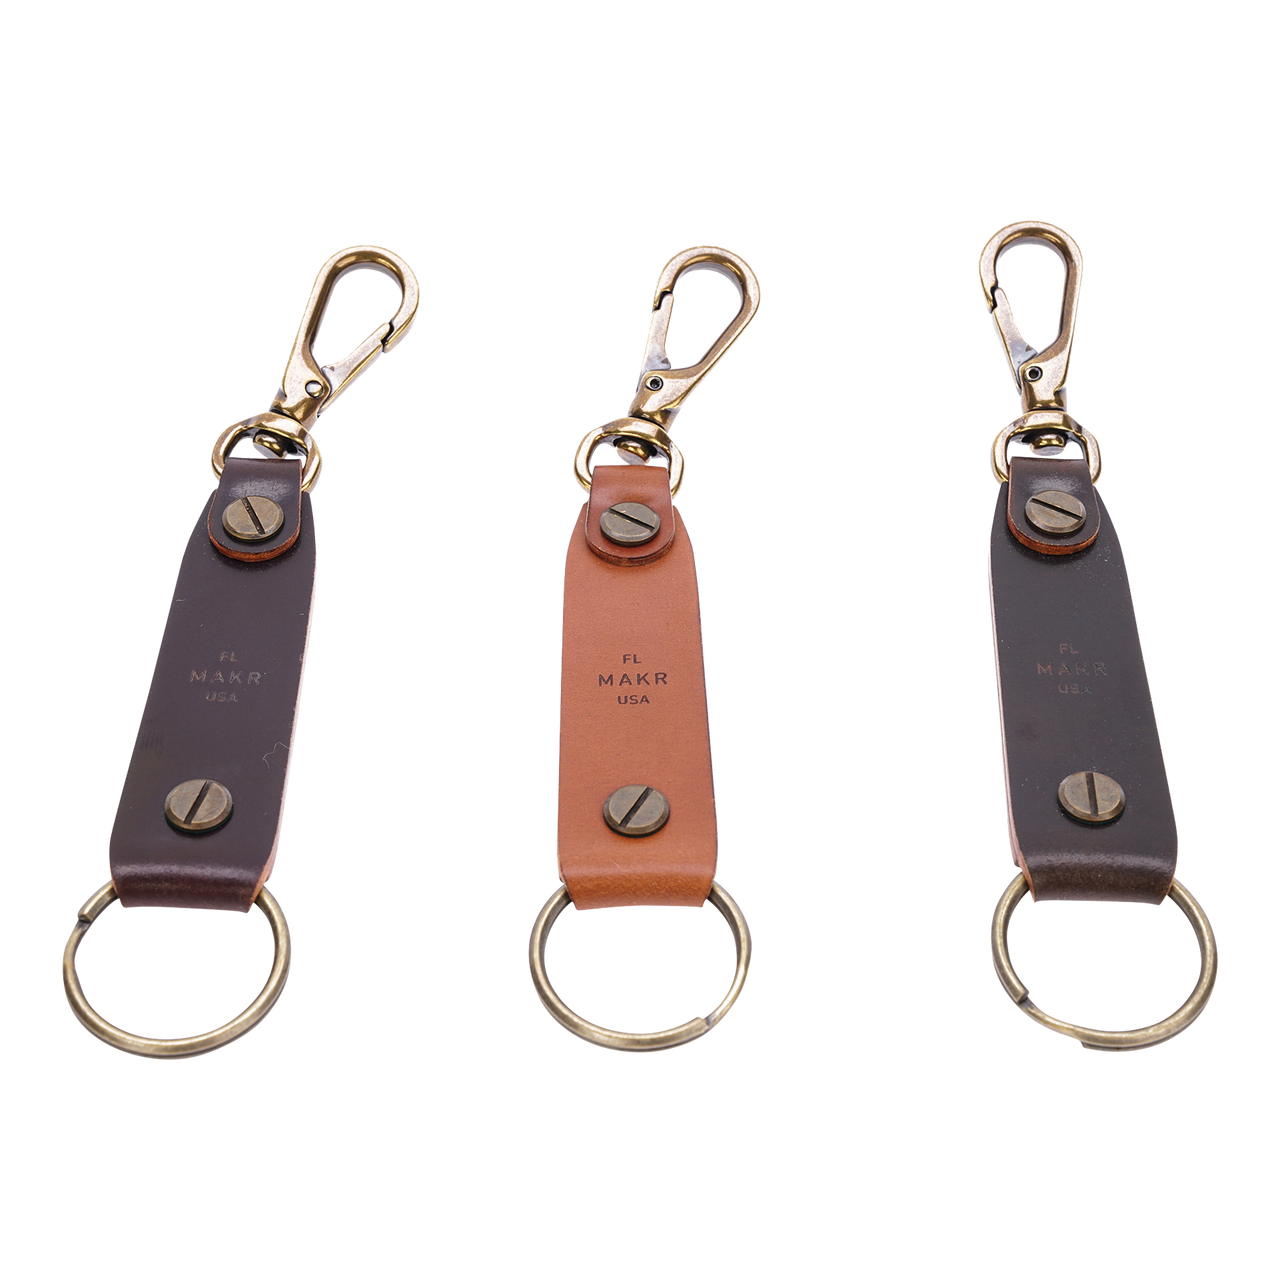 Makr Key Chain with Snap Hook in Cordovan Leather